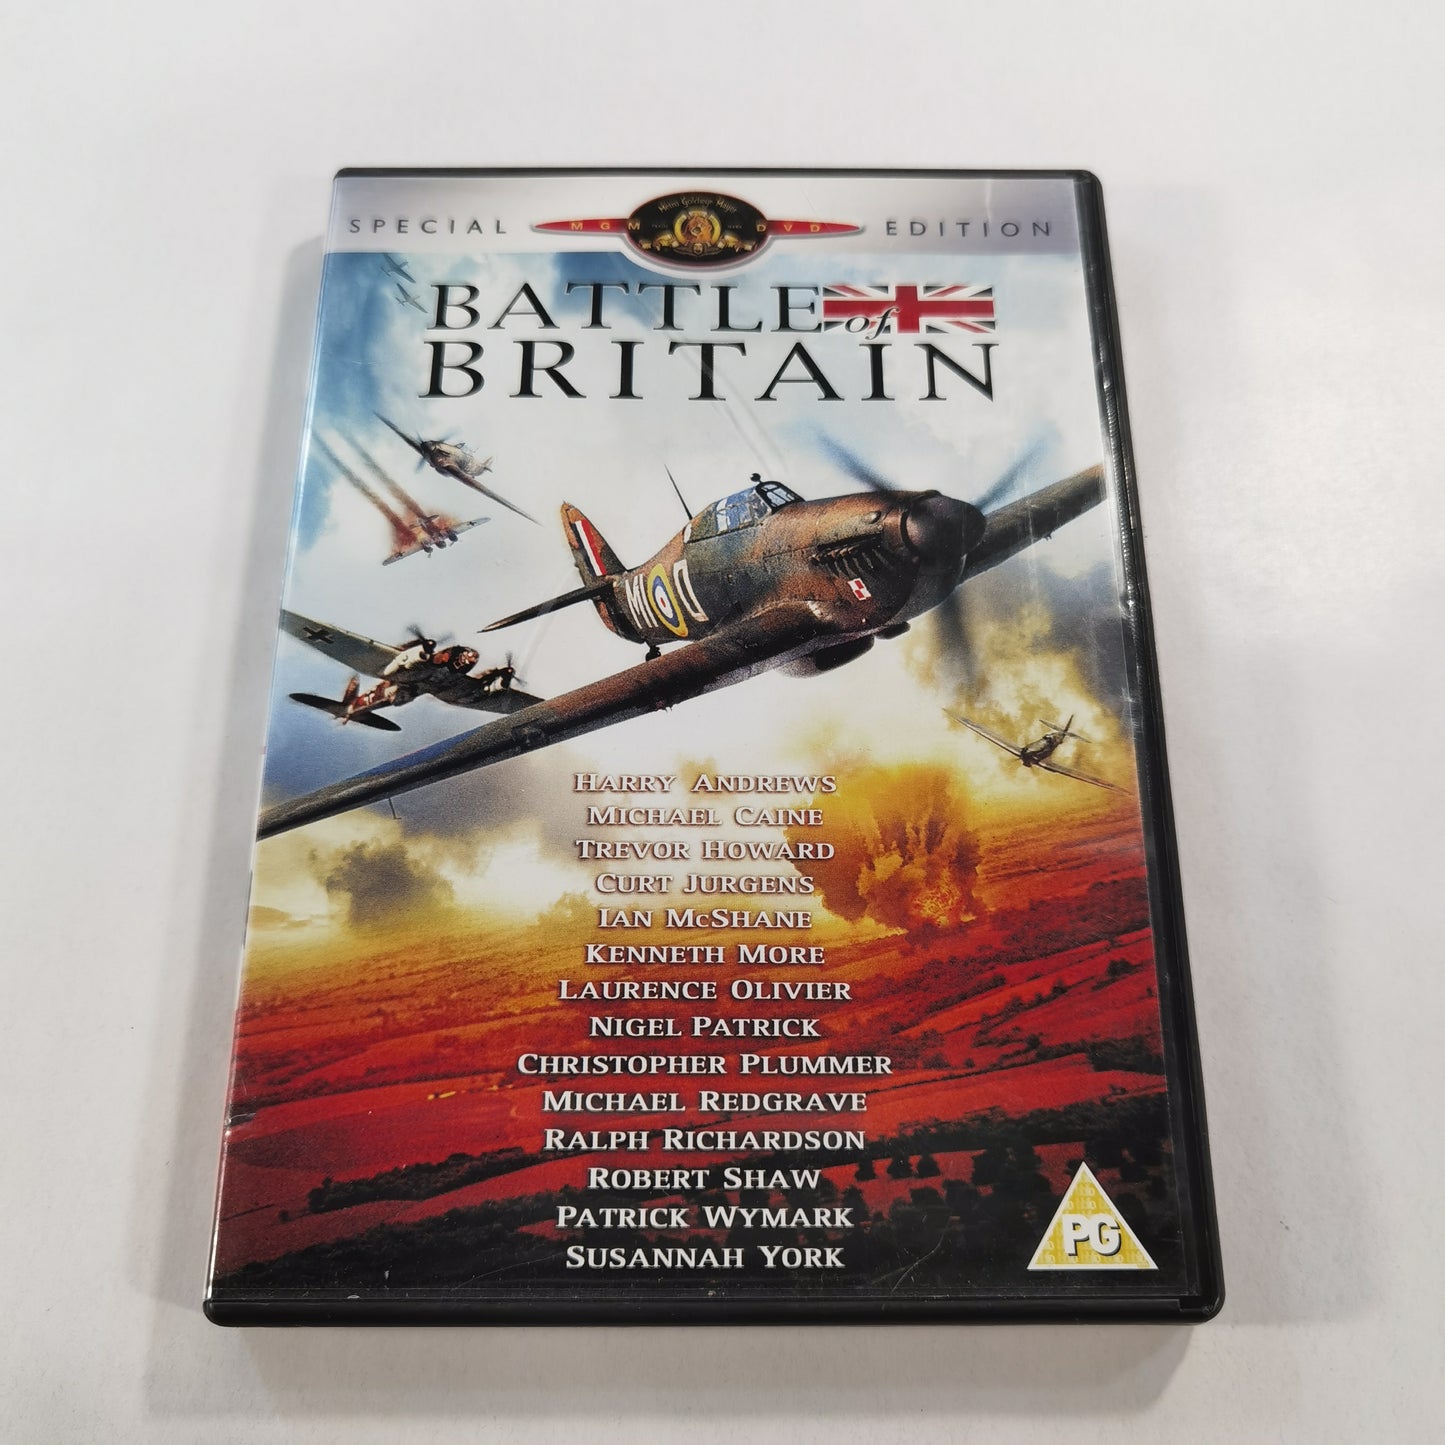 The Battle of Britain (1969) - DVD UK 2004 Special Edition